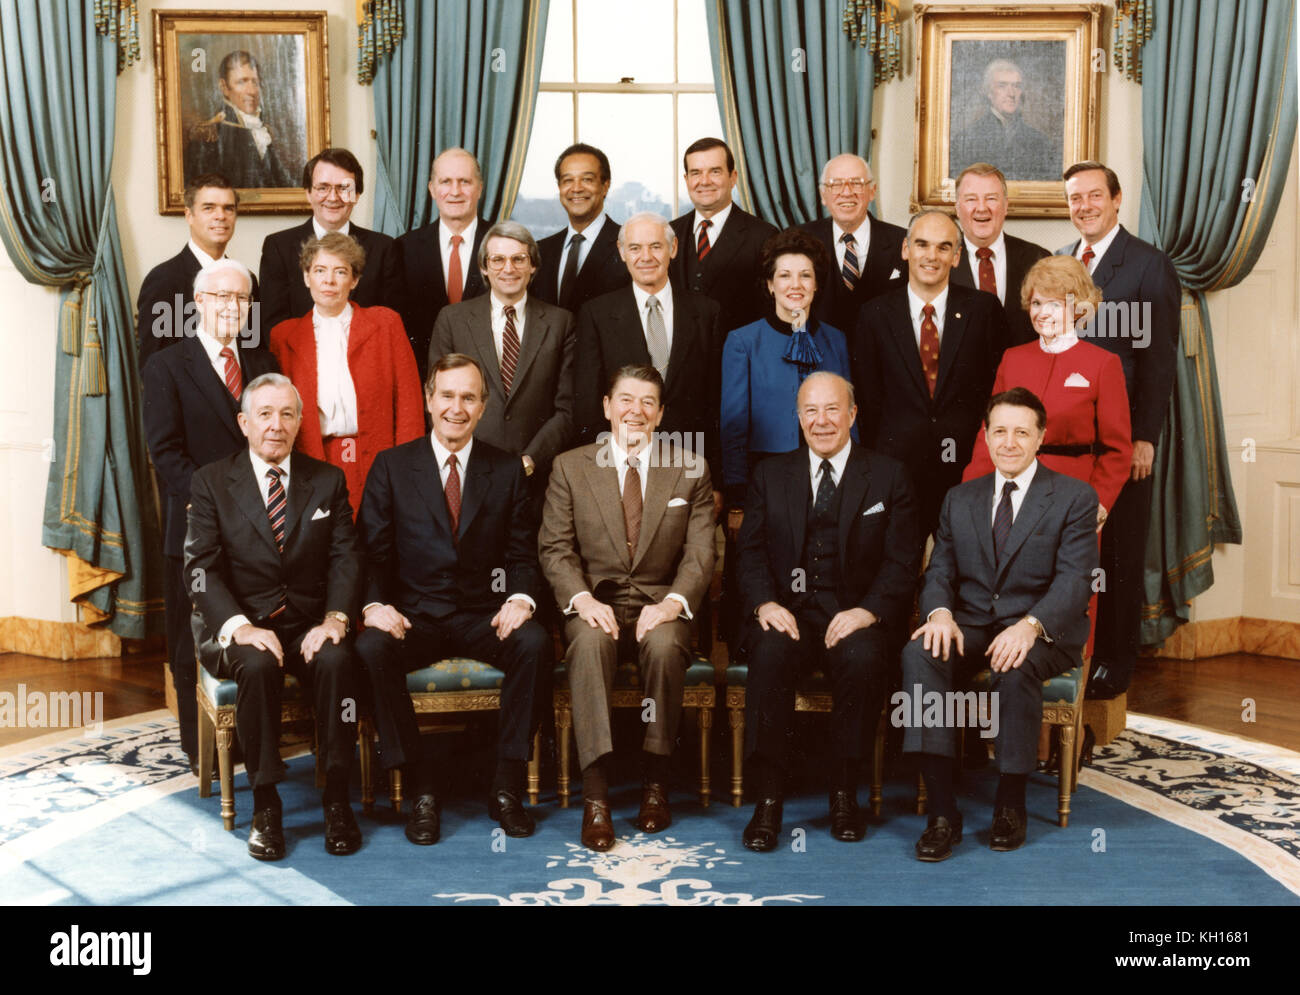 President Ronald Reagan poses on the third anniversary of his inauguration with members of his cabinet and aides at the White House. First row: Donald Regan, George Bush, Mr. Reagan, George Schultz, Casper Weinberger. Second row: Terrell Bell, Jeane Kirkpatrick, David Stockman, William French Smith, Elizabeth Dole, Donald Hodel, Margaret Heckler. Third row: John Block, Raymond Donovan, Malcolm Baldridge, Samuel Pierce, William Clark, William Casey, Edwin Meese and William Brock. Washington, DC, 1/20/1984. Photo by Michael Evans. Stock Photo